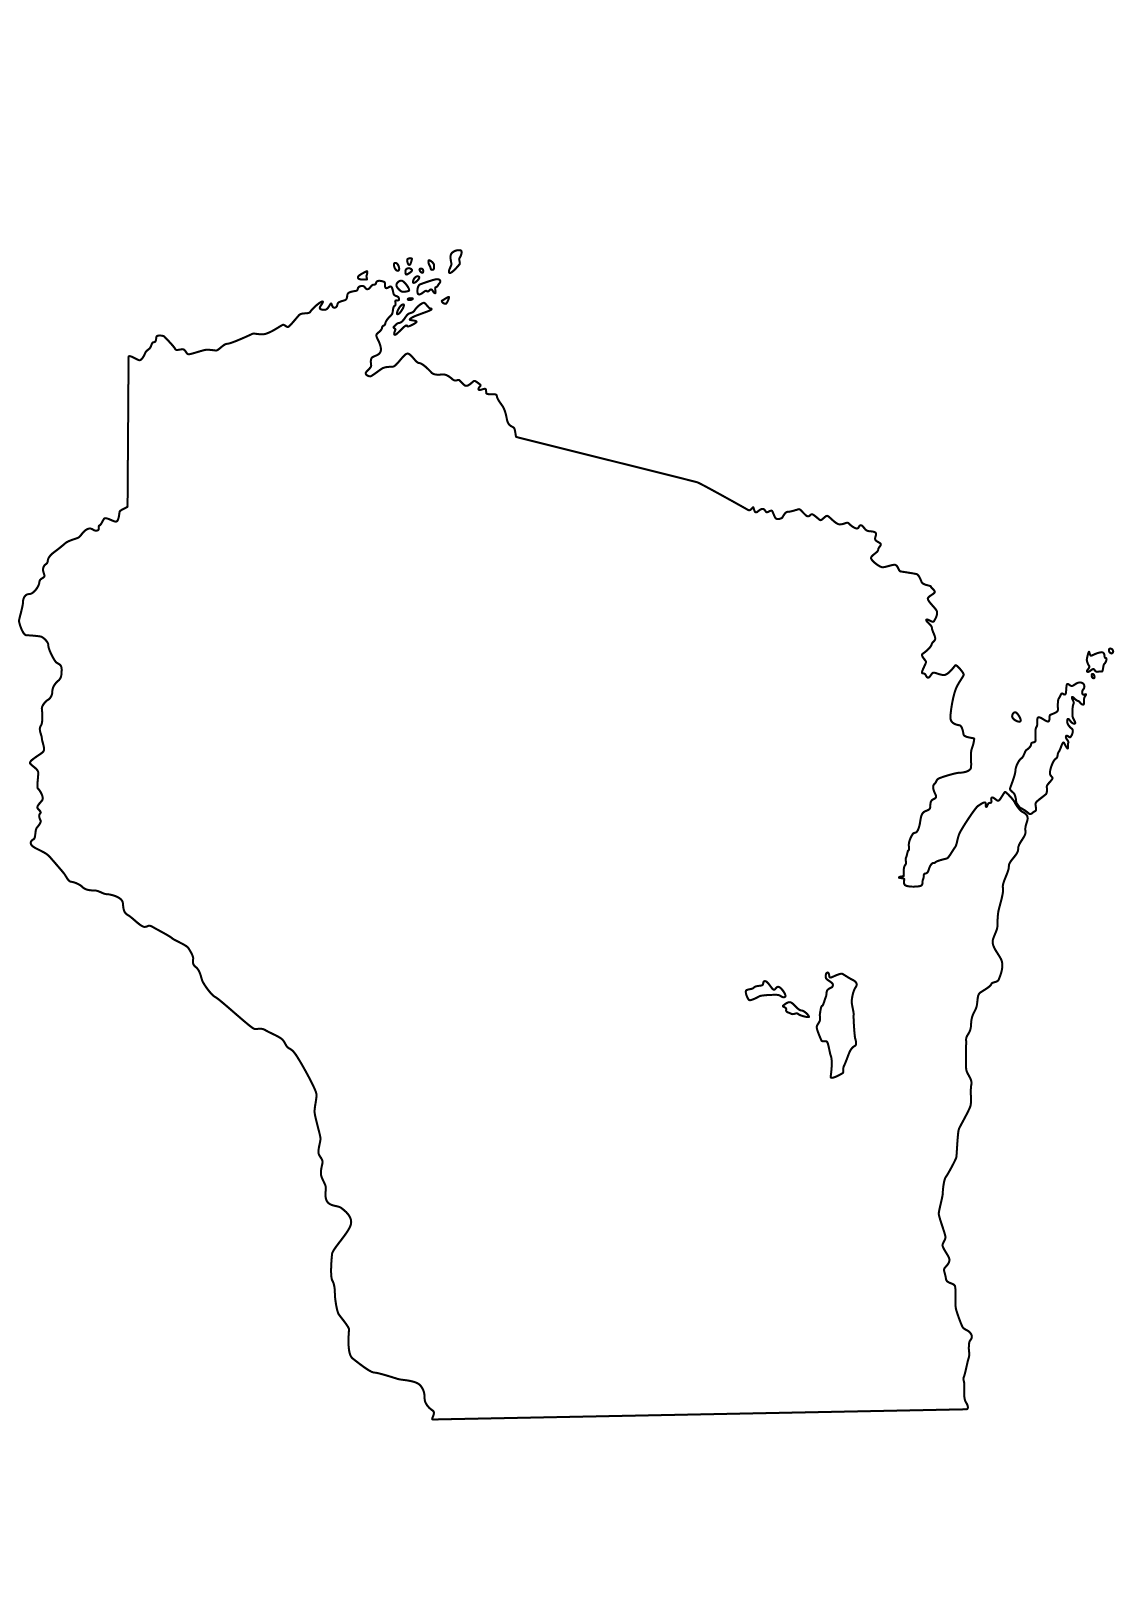 Free Wisconsin Outline, Download Free Wisconsin Outline png images